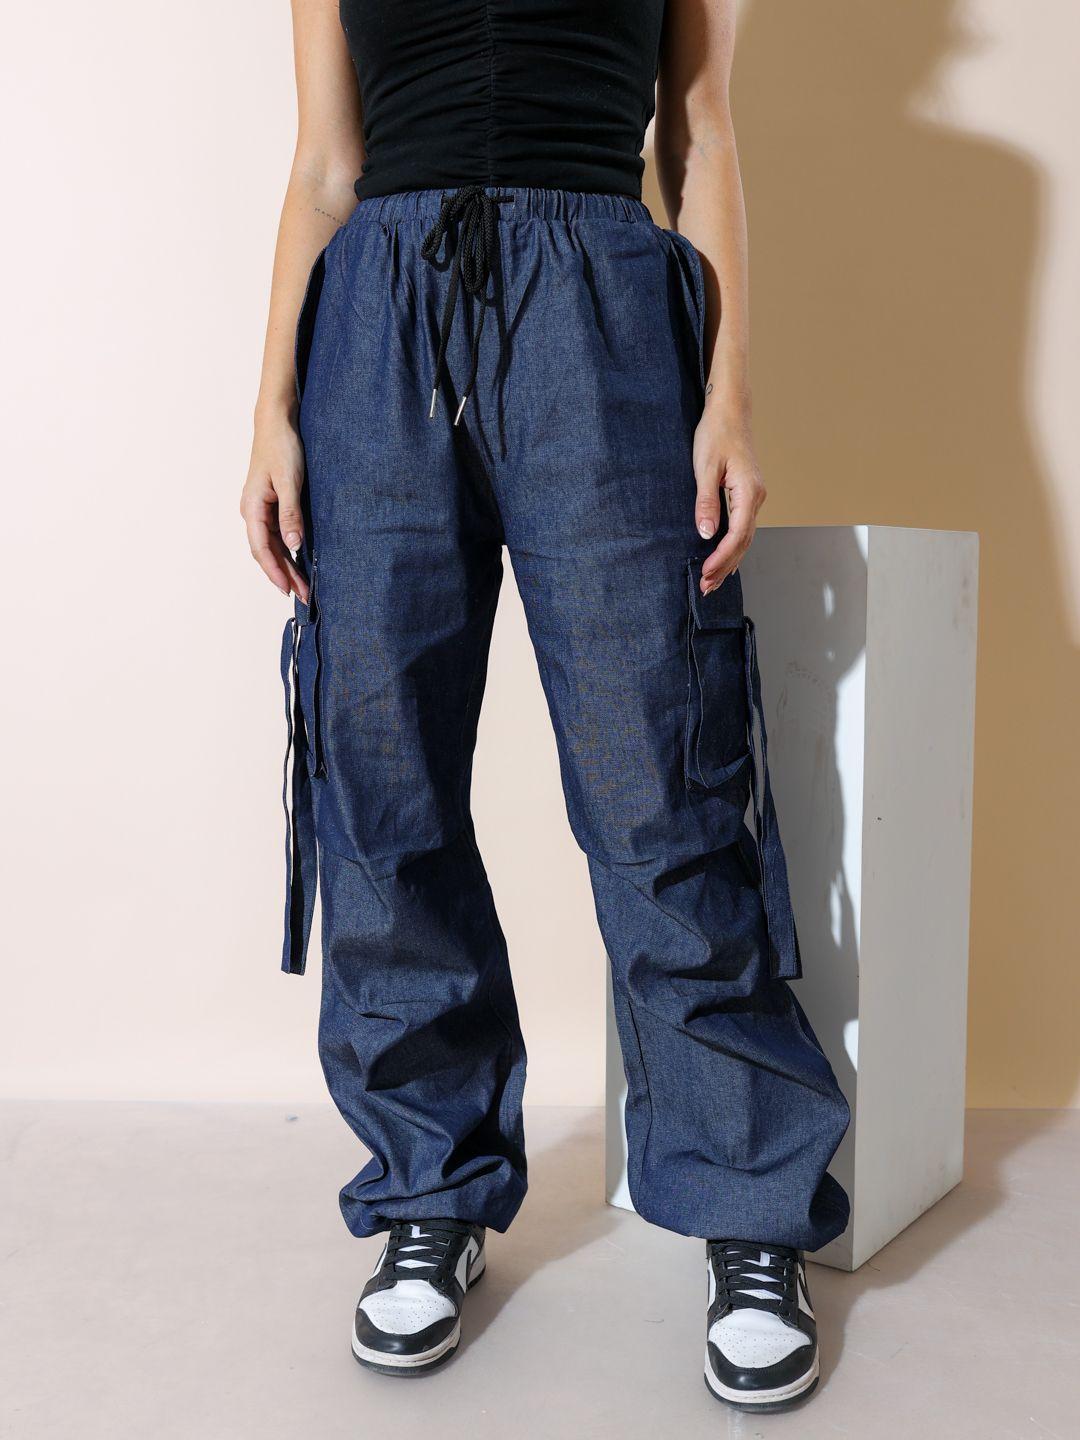 stylecast-x-hersheinbox-women-pure-cotton-relaxed-fit-denim-joggers